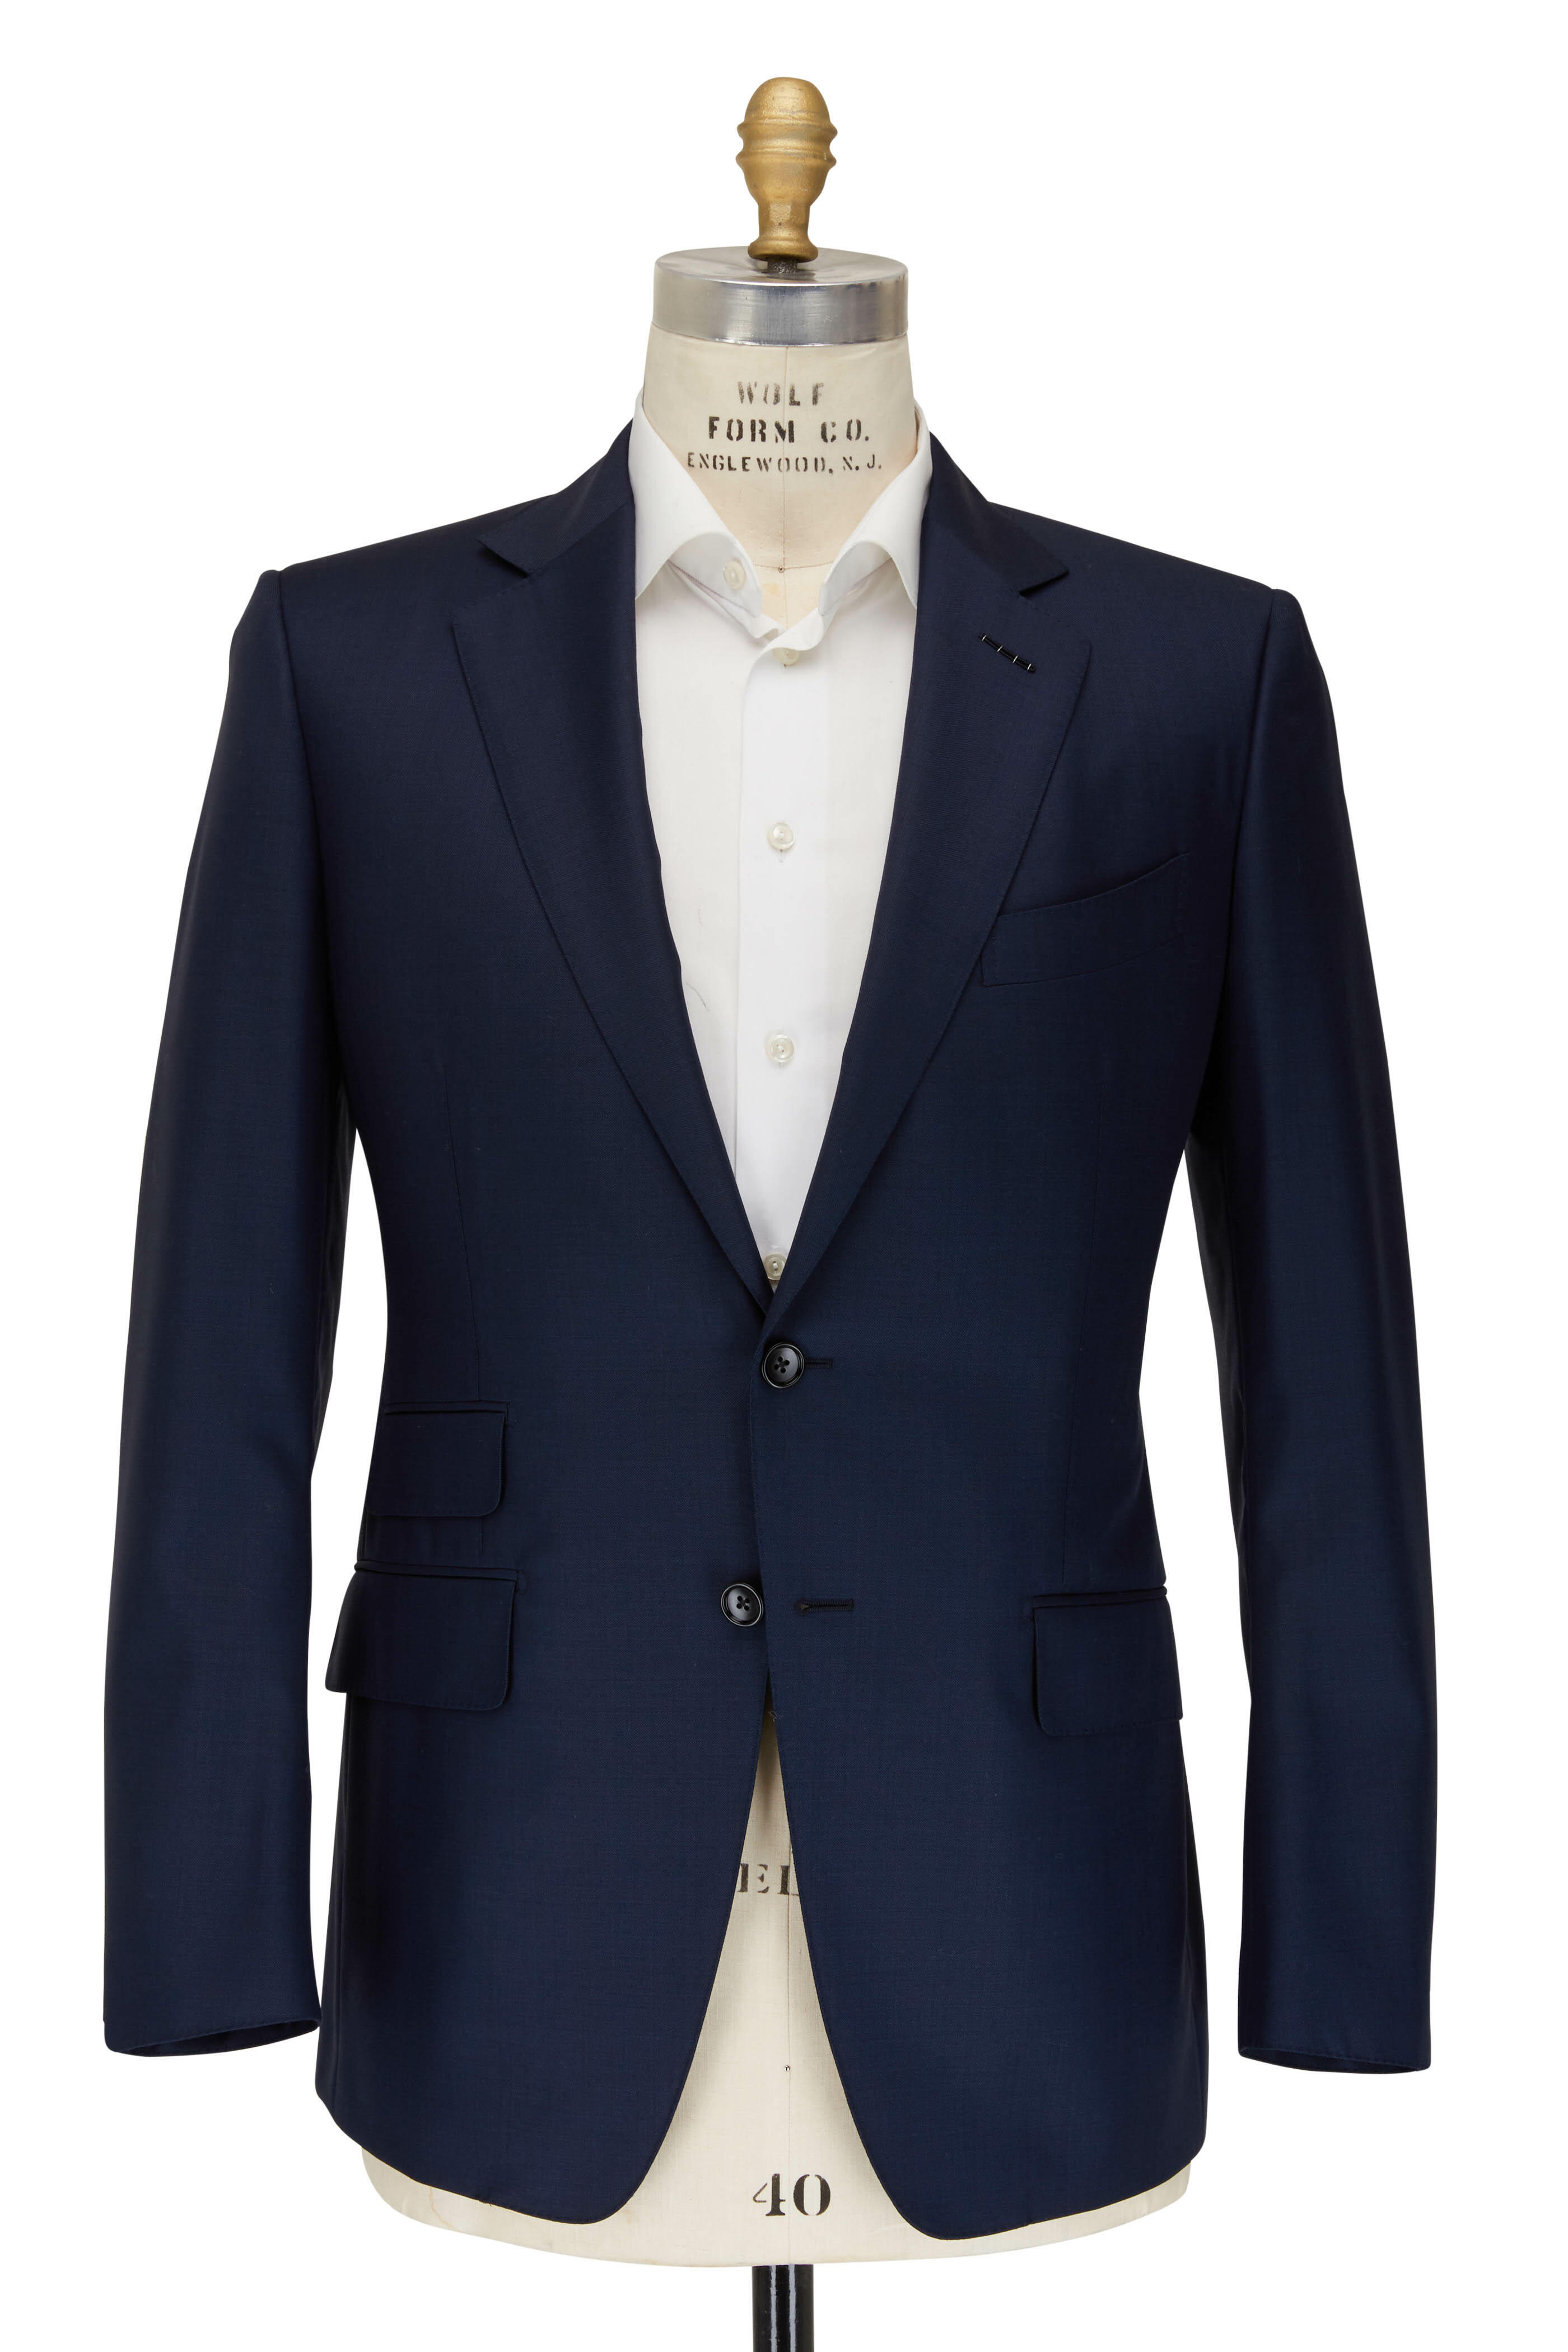 Tom Ford - Navy Blue Wool Sharkskin Suit | Mitchell Stores